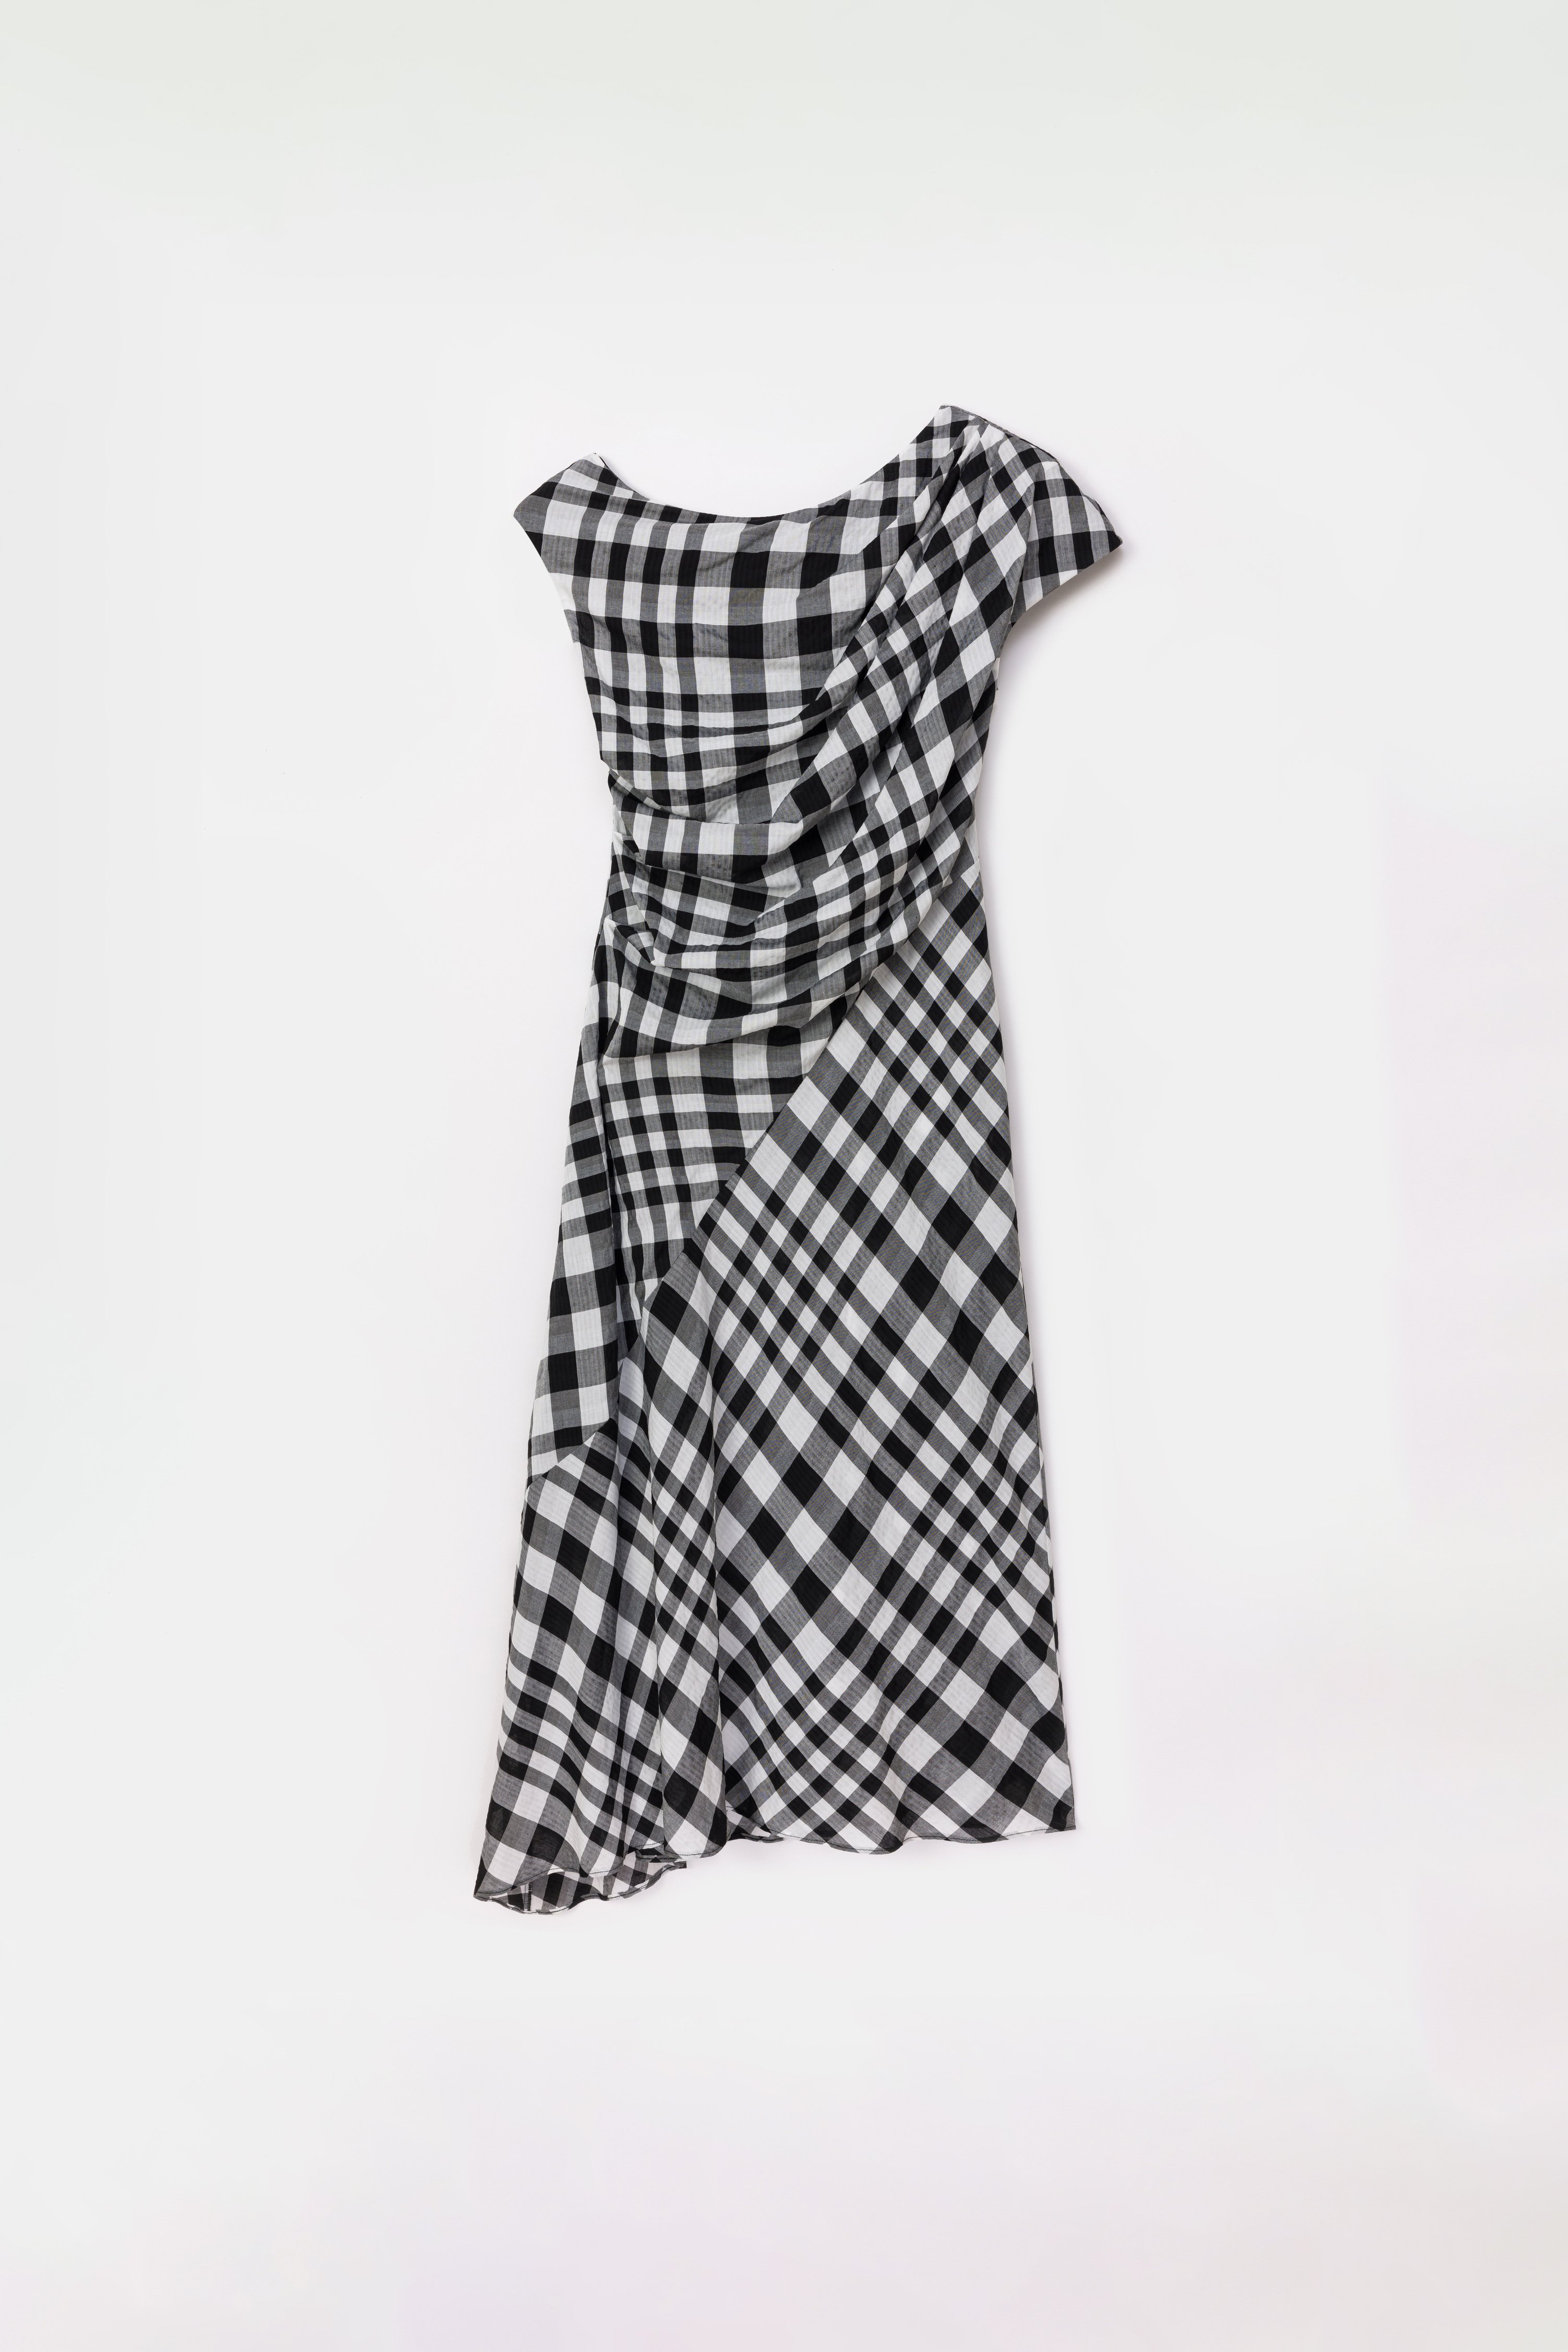 Ama Drapped Dress in  Checkered Pattern